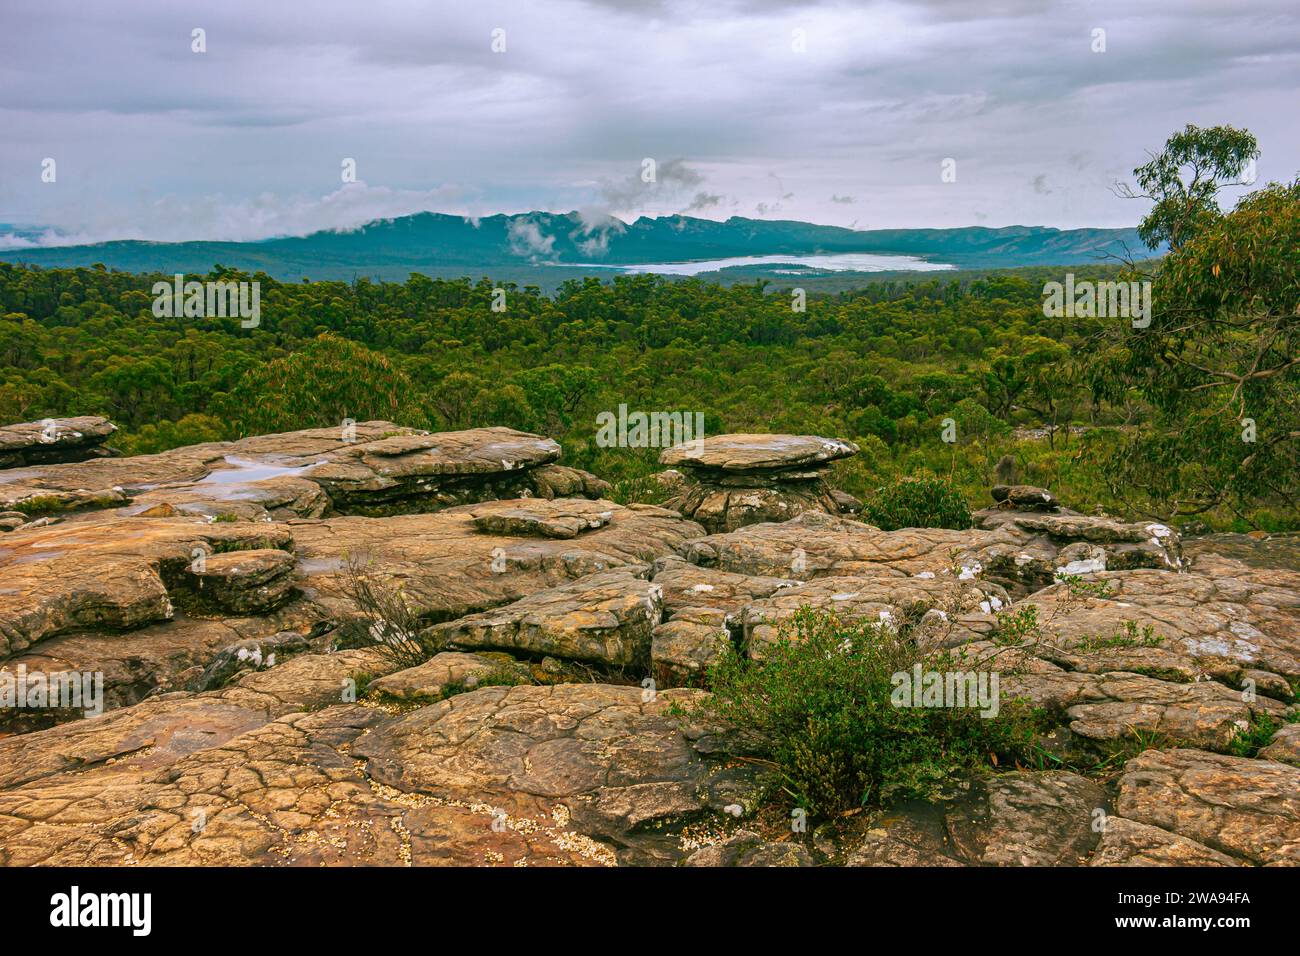 The sandstone cliff of Reeds Lookout in Grampians National Park,Victoria, Australia. Stock Photo